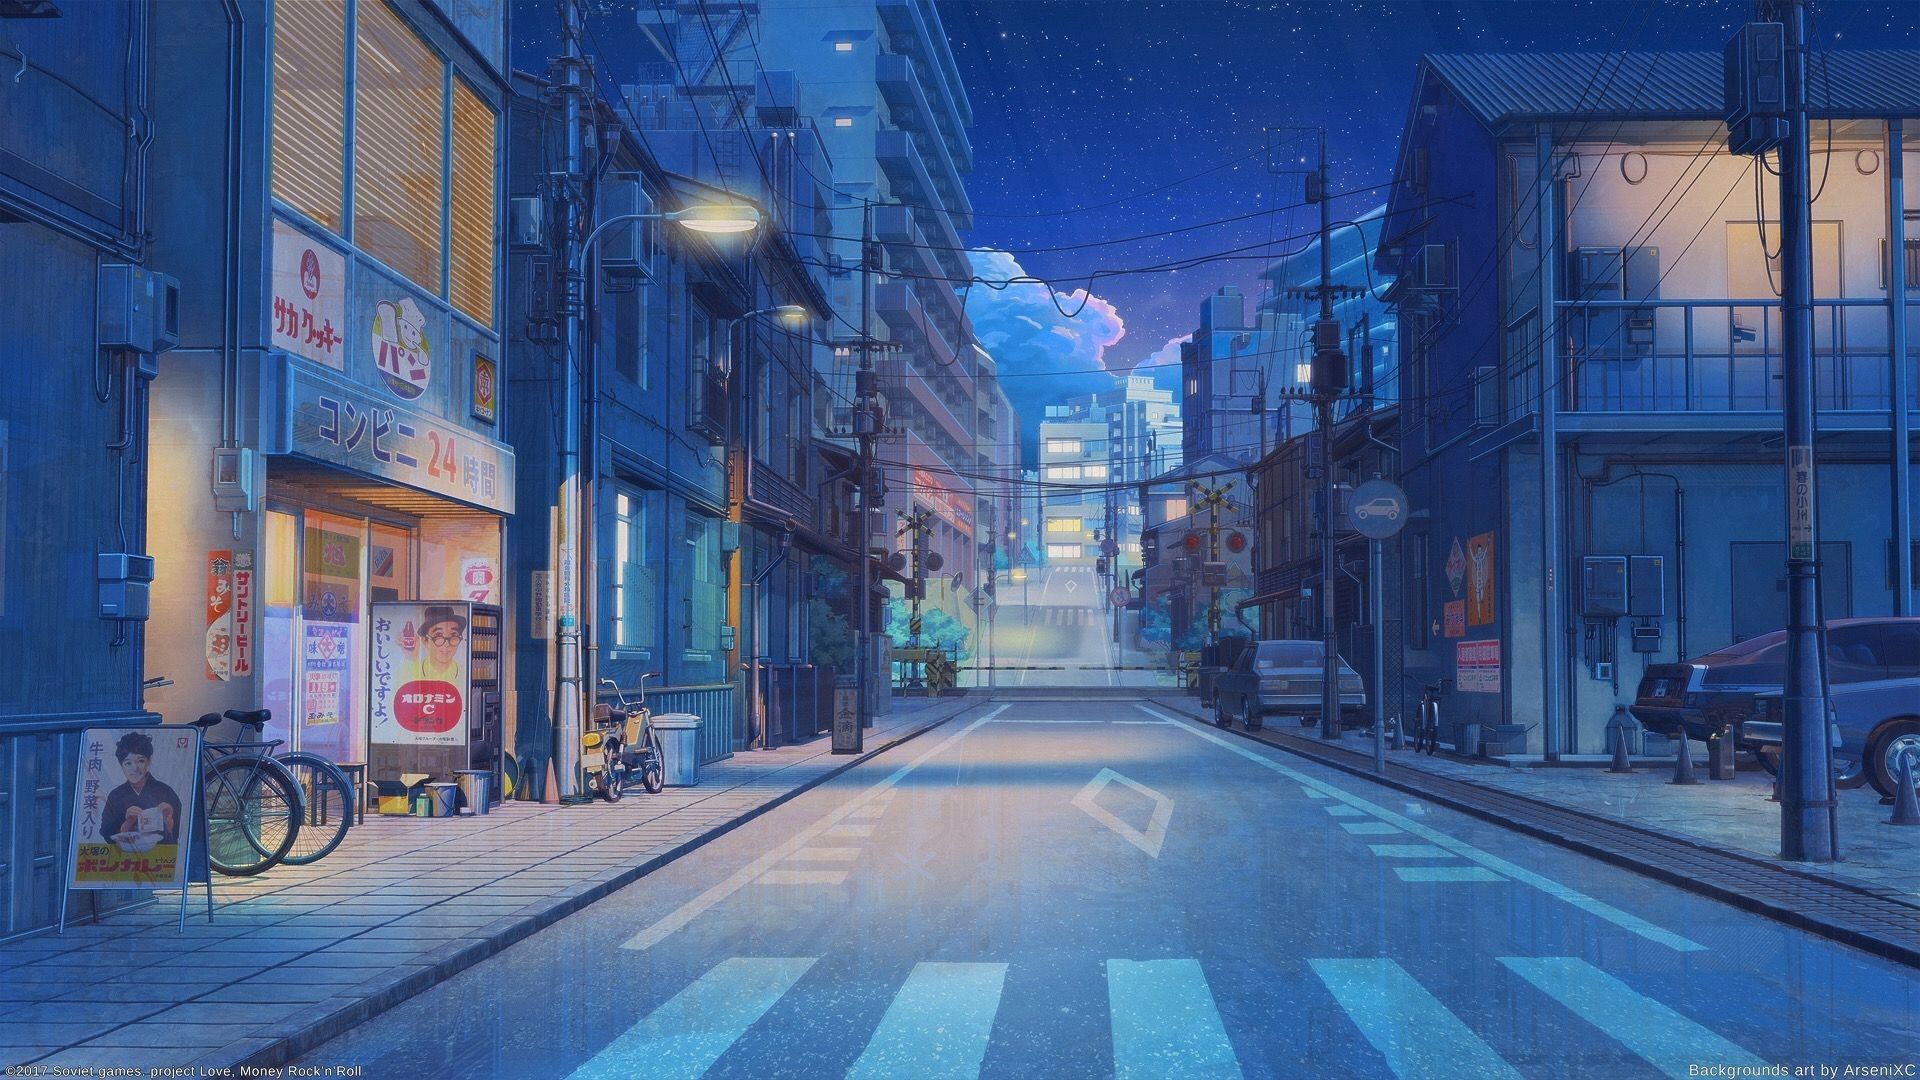 Top 999+ Retro Anime Aesthetic Wallpaper Full HD, 4K✓Free to Use